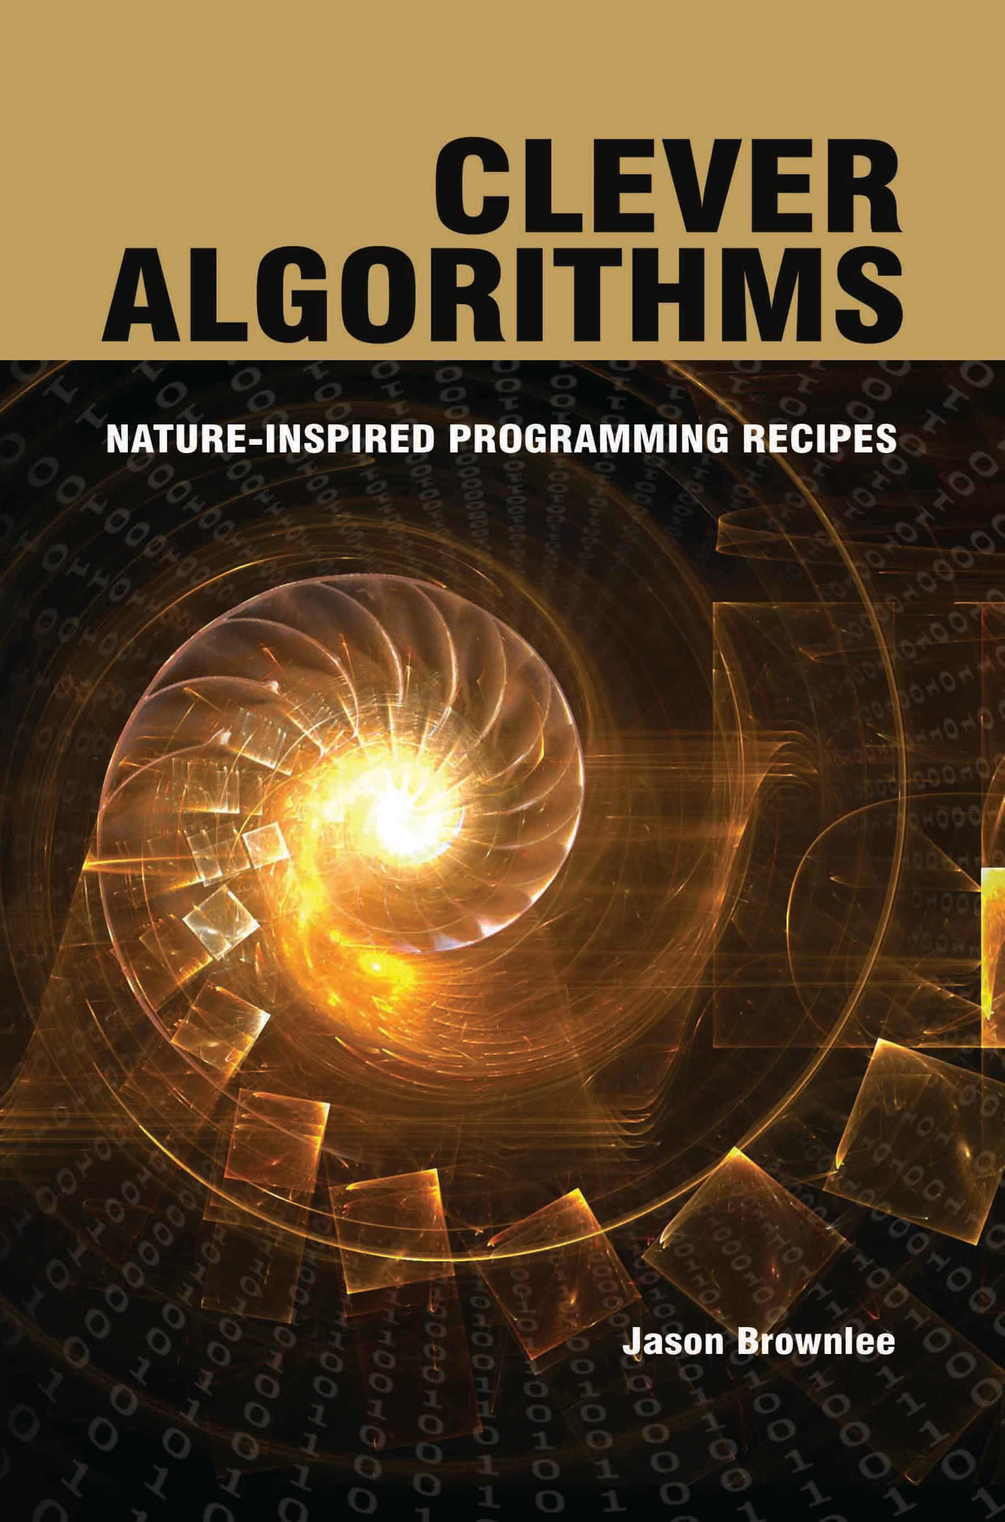 Clever Algorithms: Nature-Inspired Programming Recipes